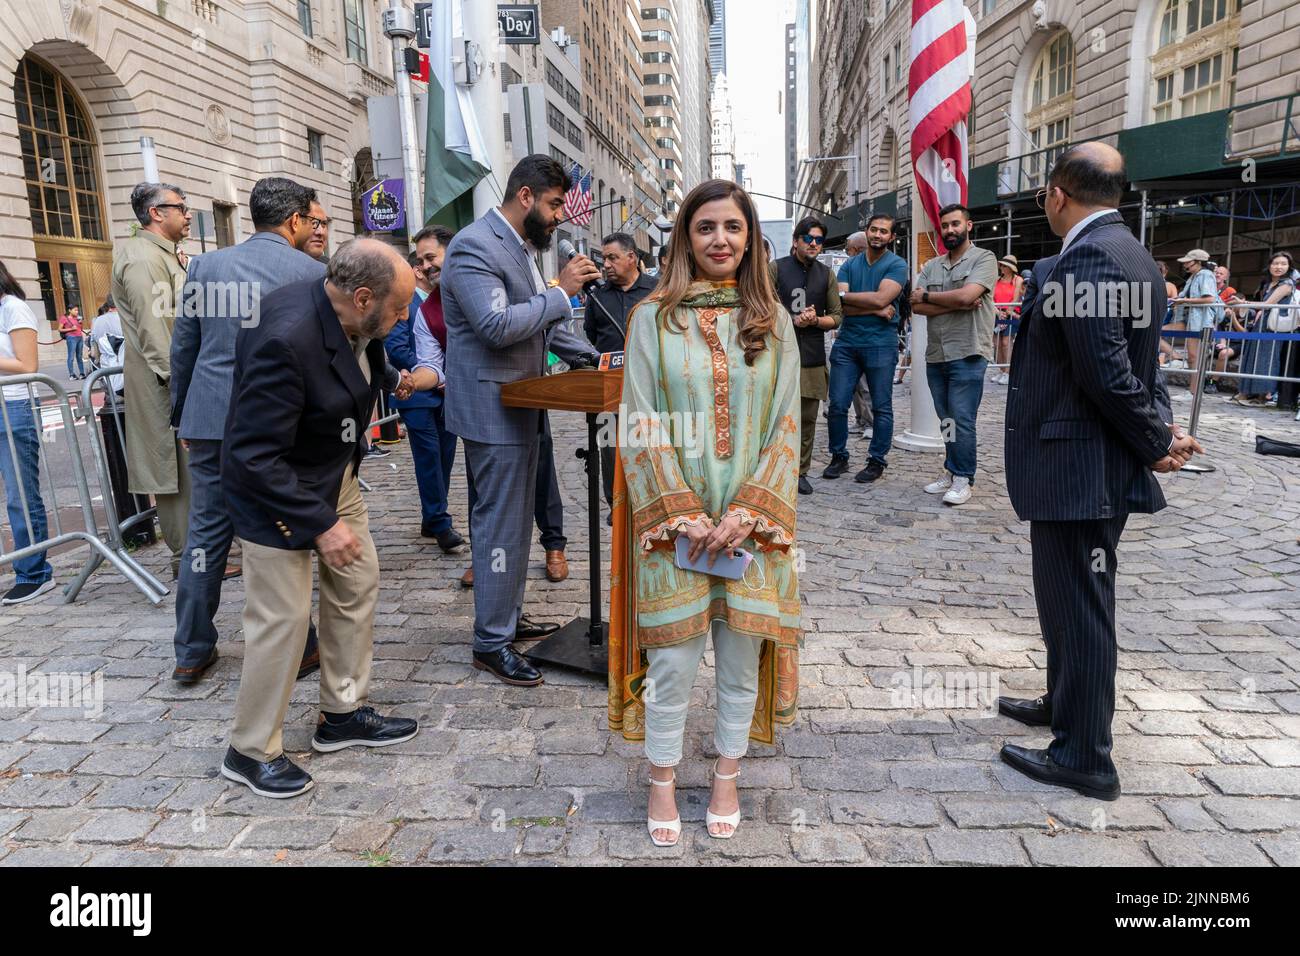 New York, NY - August 12. 2022: Consul General of Pakistan Ayesha Ali attends ceremony of Pakistani flag raising at Bowling Green Park Stock Photo